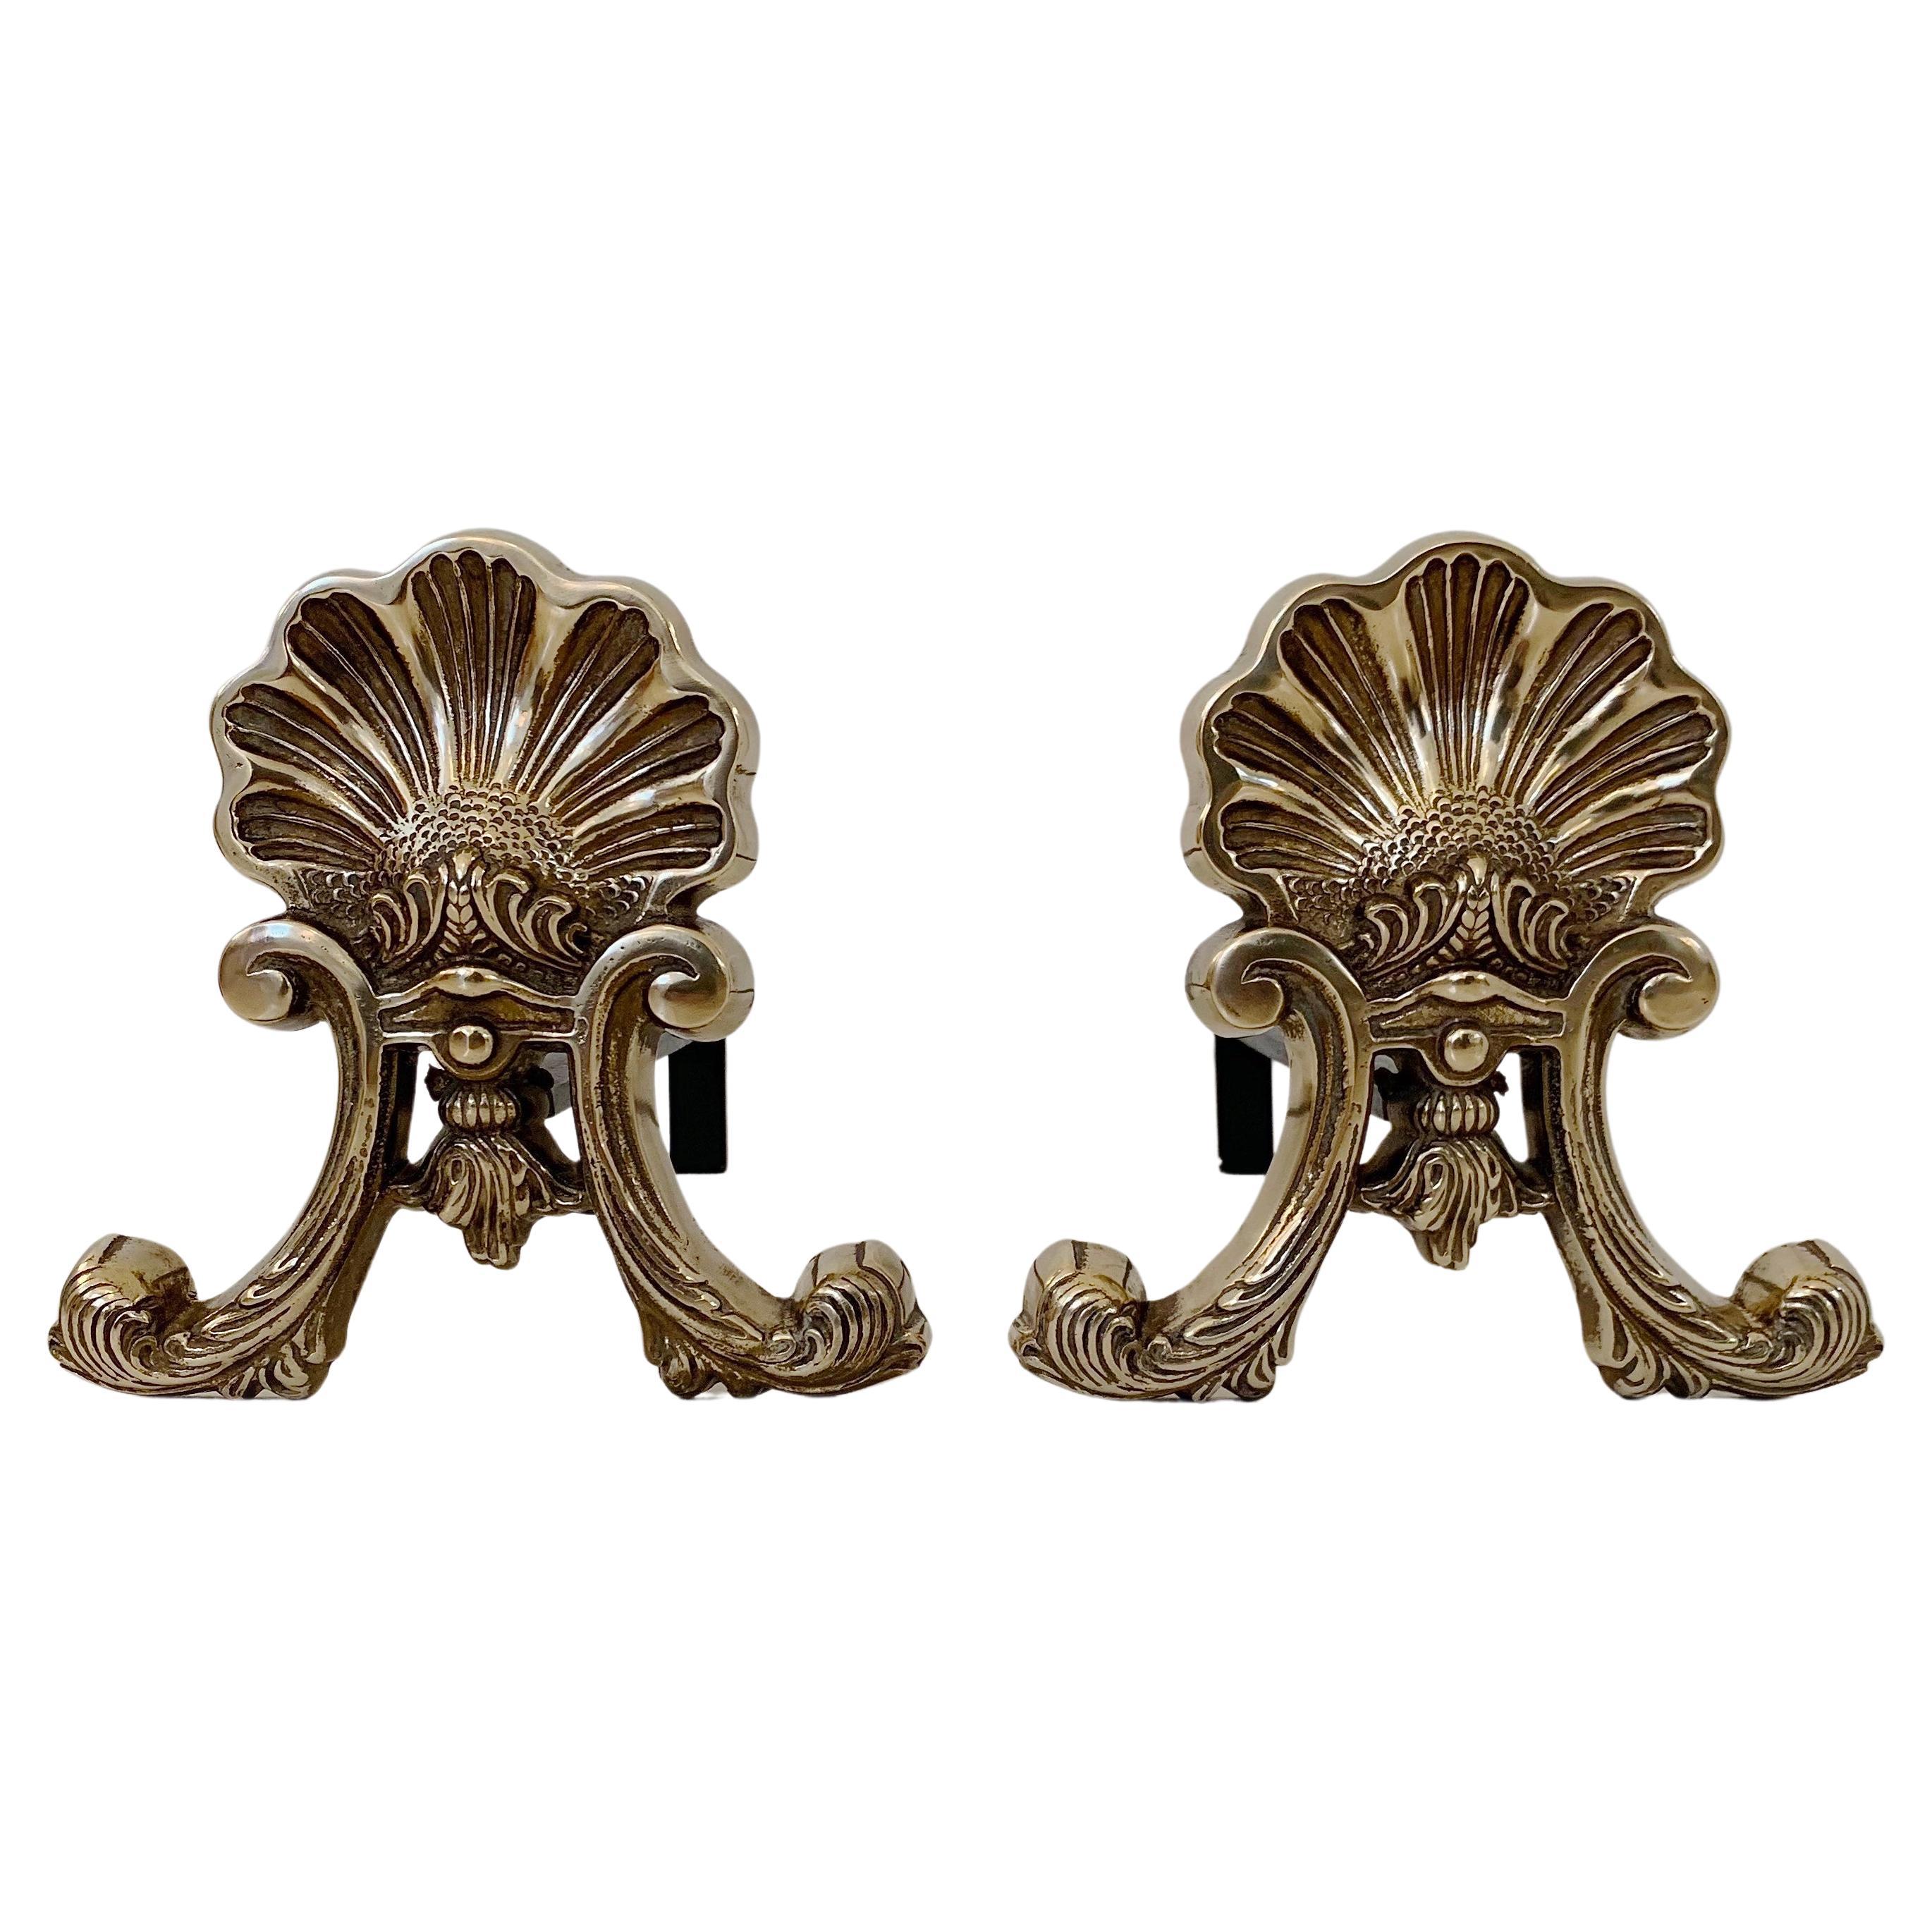 Nice pair of neoclassical style shell-shaped andirons, circa 1900, France.
Brass and iron.
Good condition.
Dimensions: 42 cm D, 22 cm W, 22 cm H.
All purchases are covered by our Buyer Protection Guarantee.
This item can be returned within 7 days of